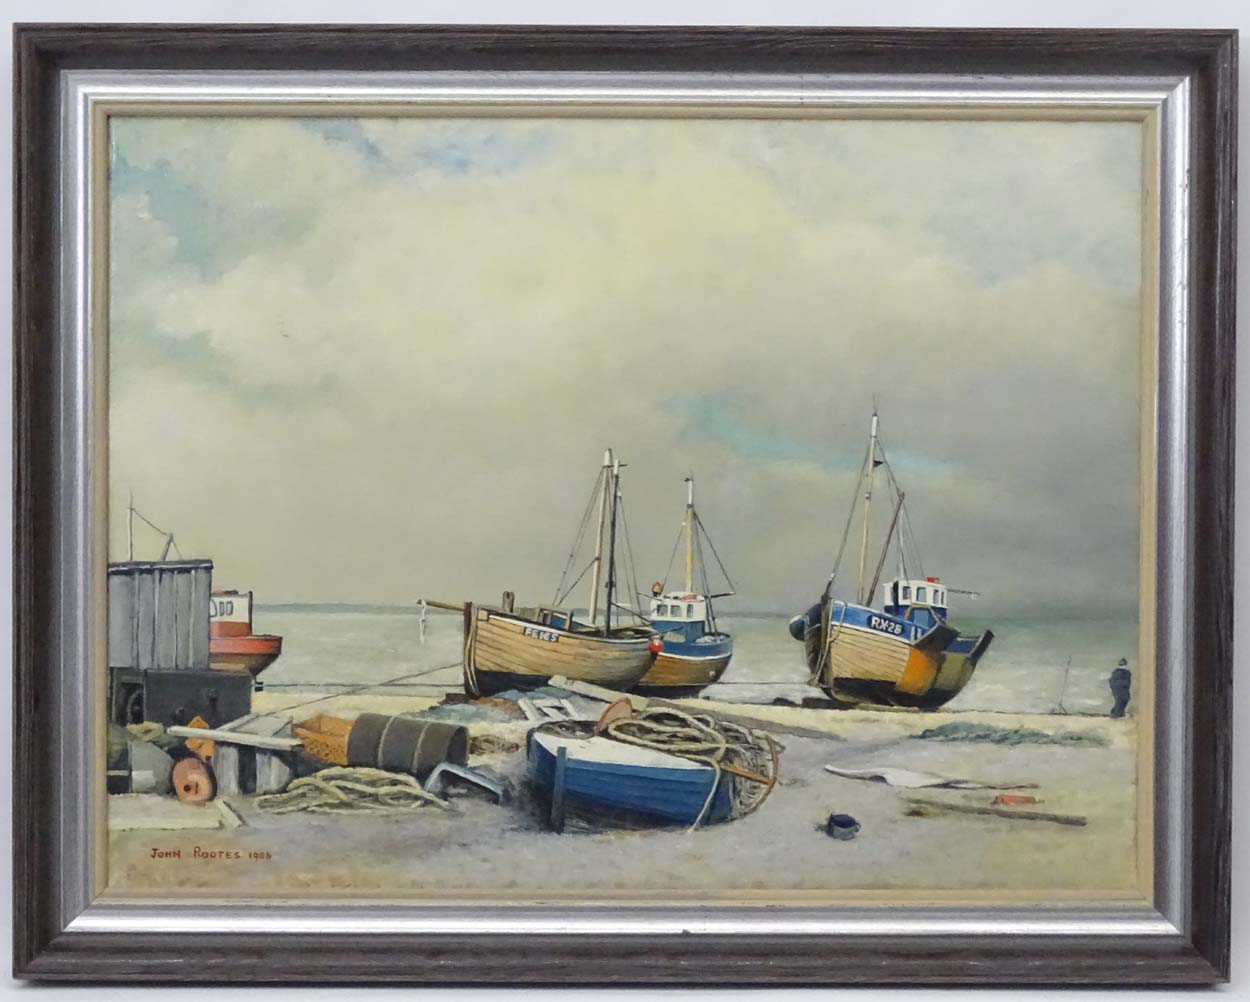 John Routes 1986 Marine School, Oil on canvas, Fishing boats on the beach in an estuary,